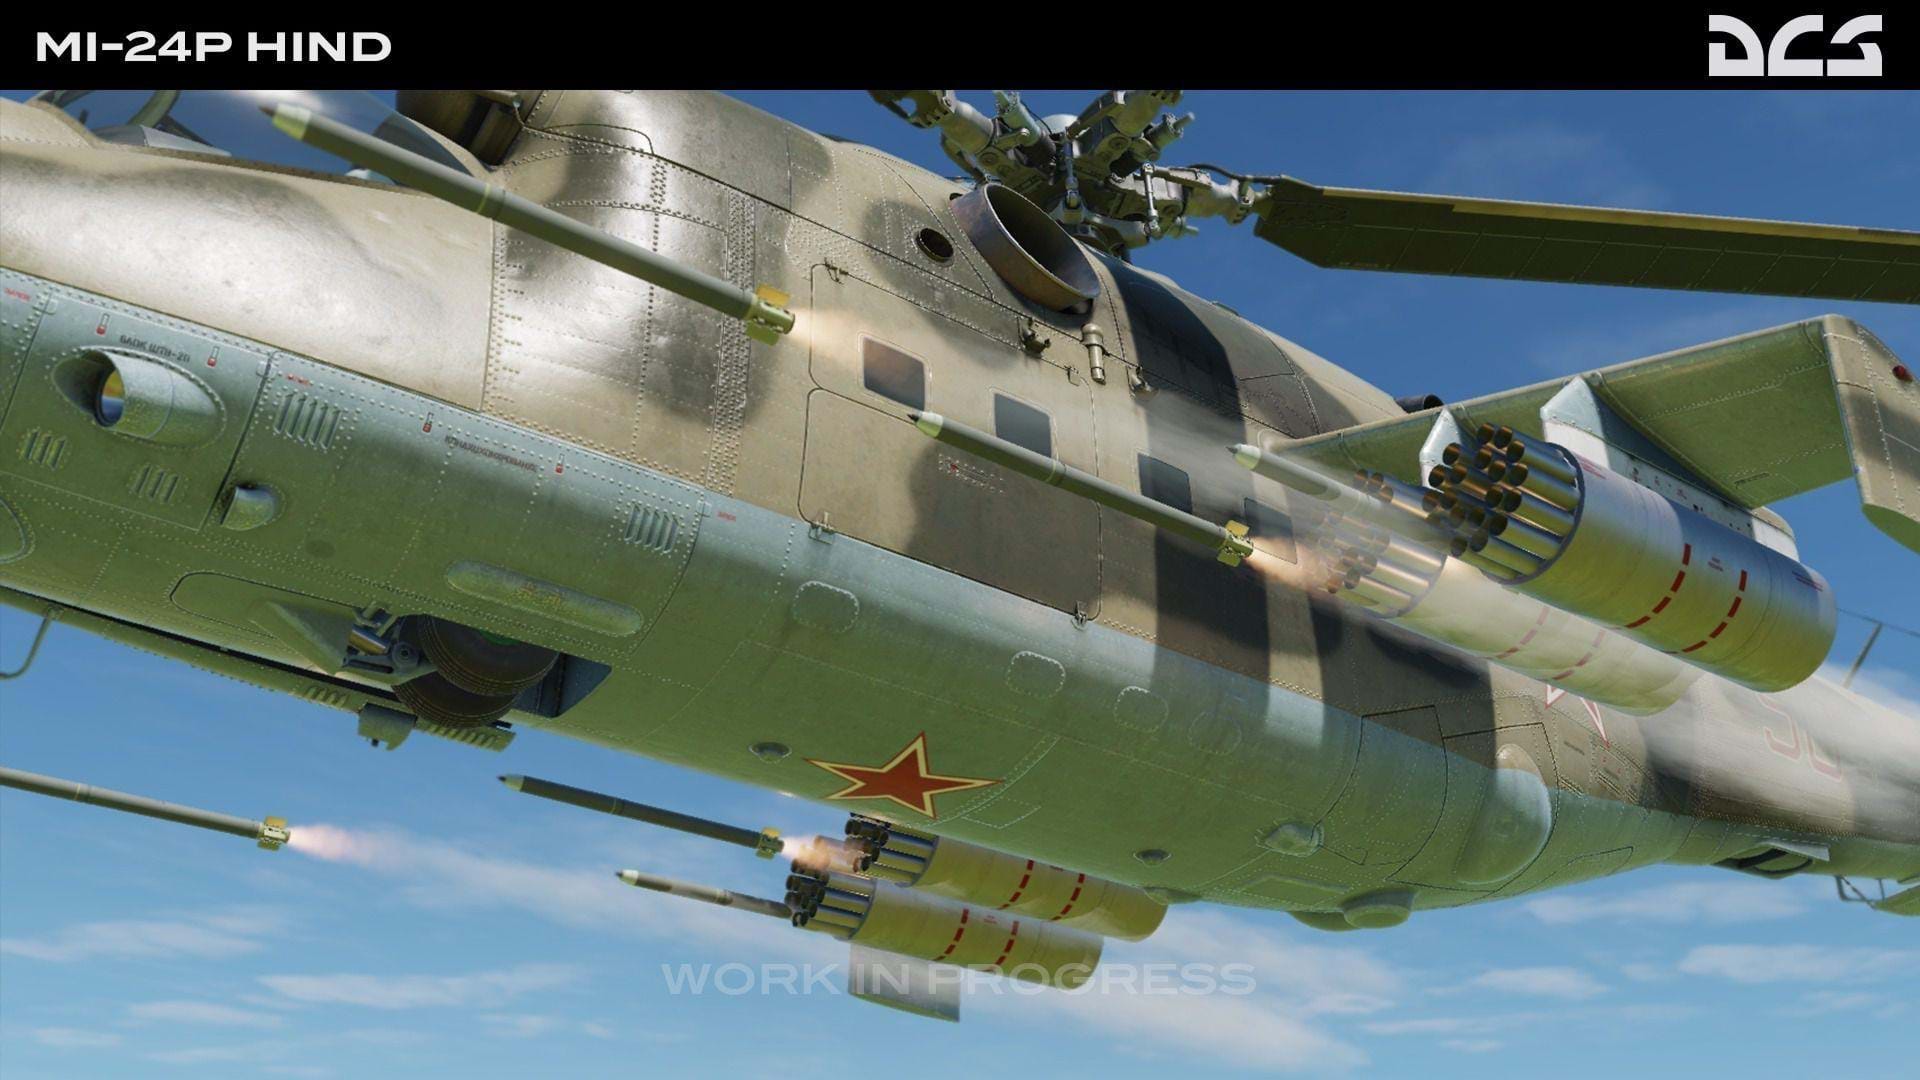 Mi-24 Hind for DCS